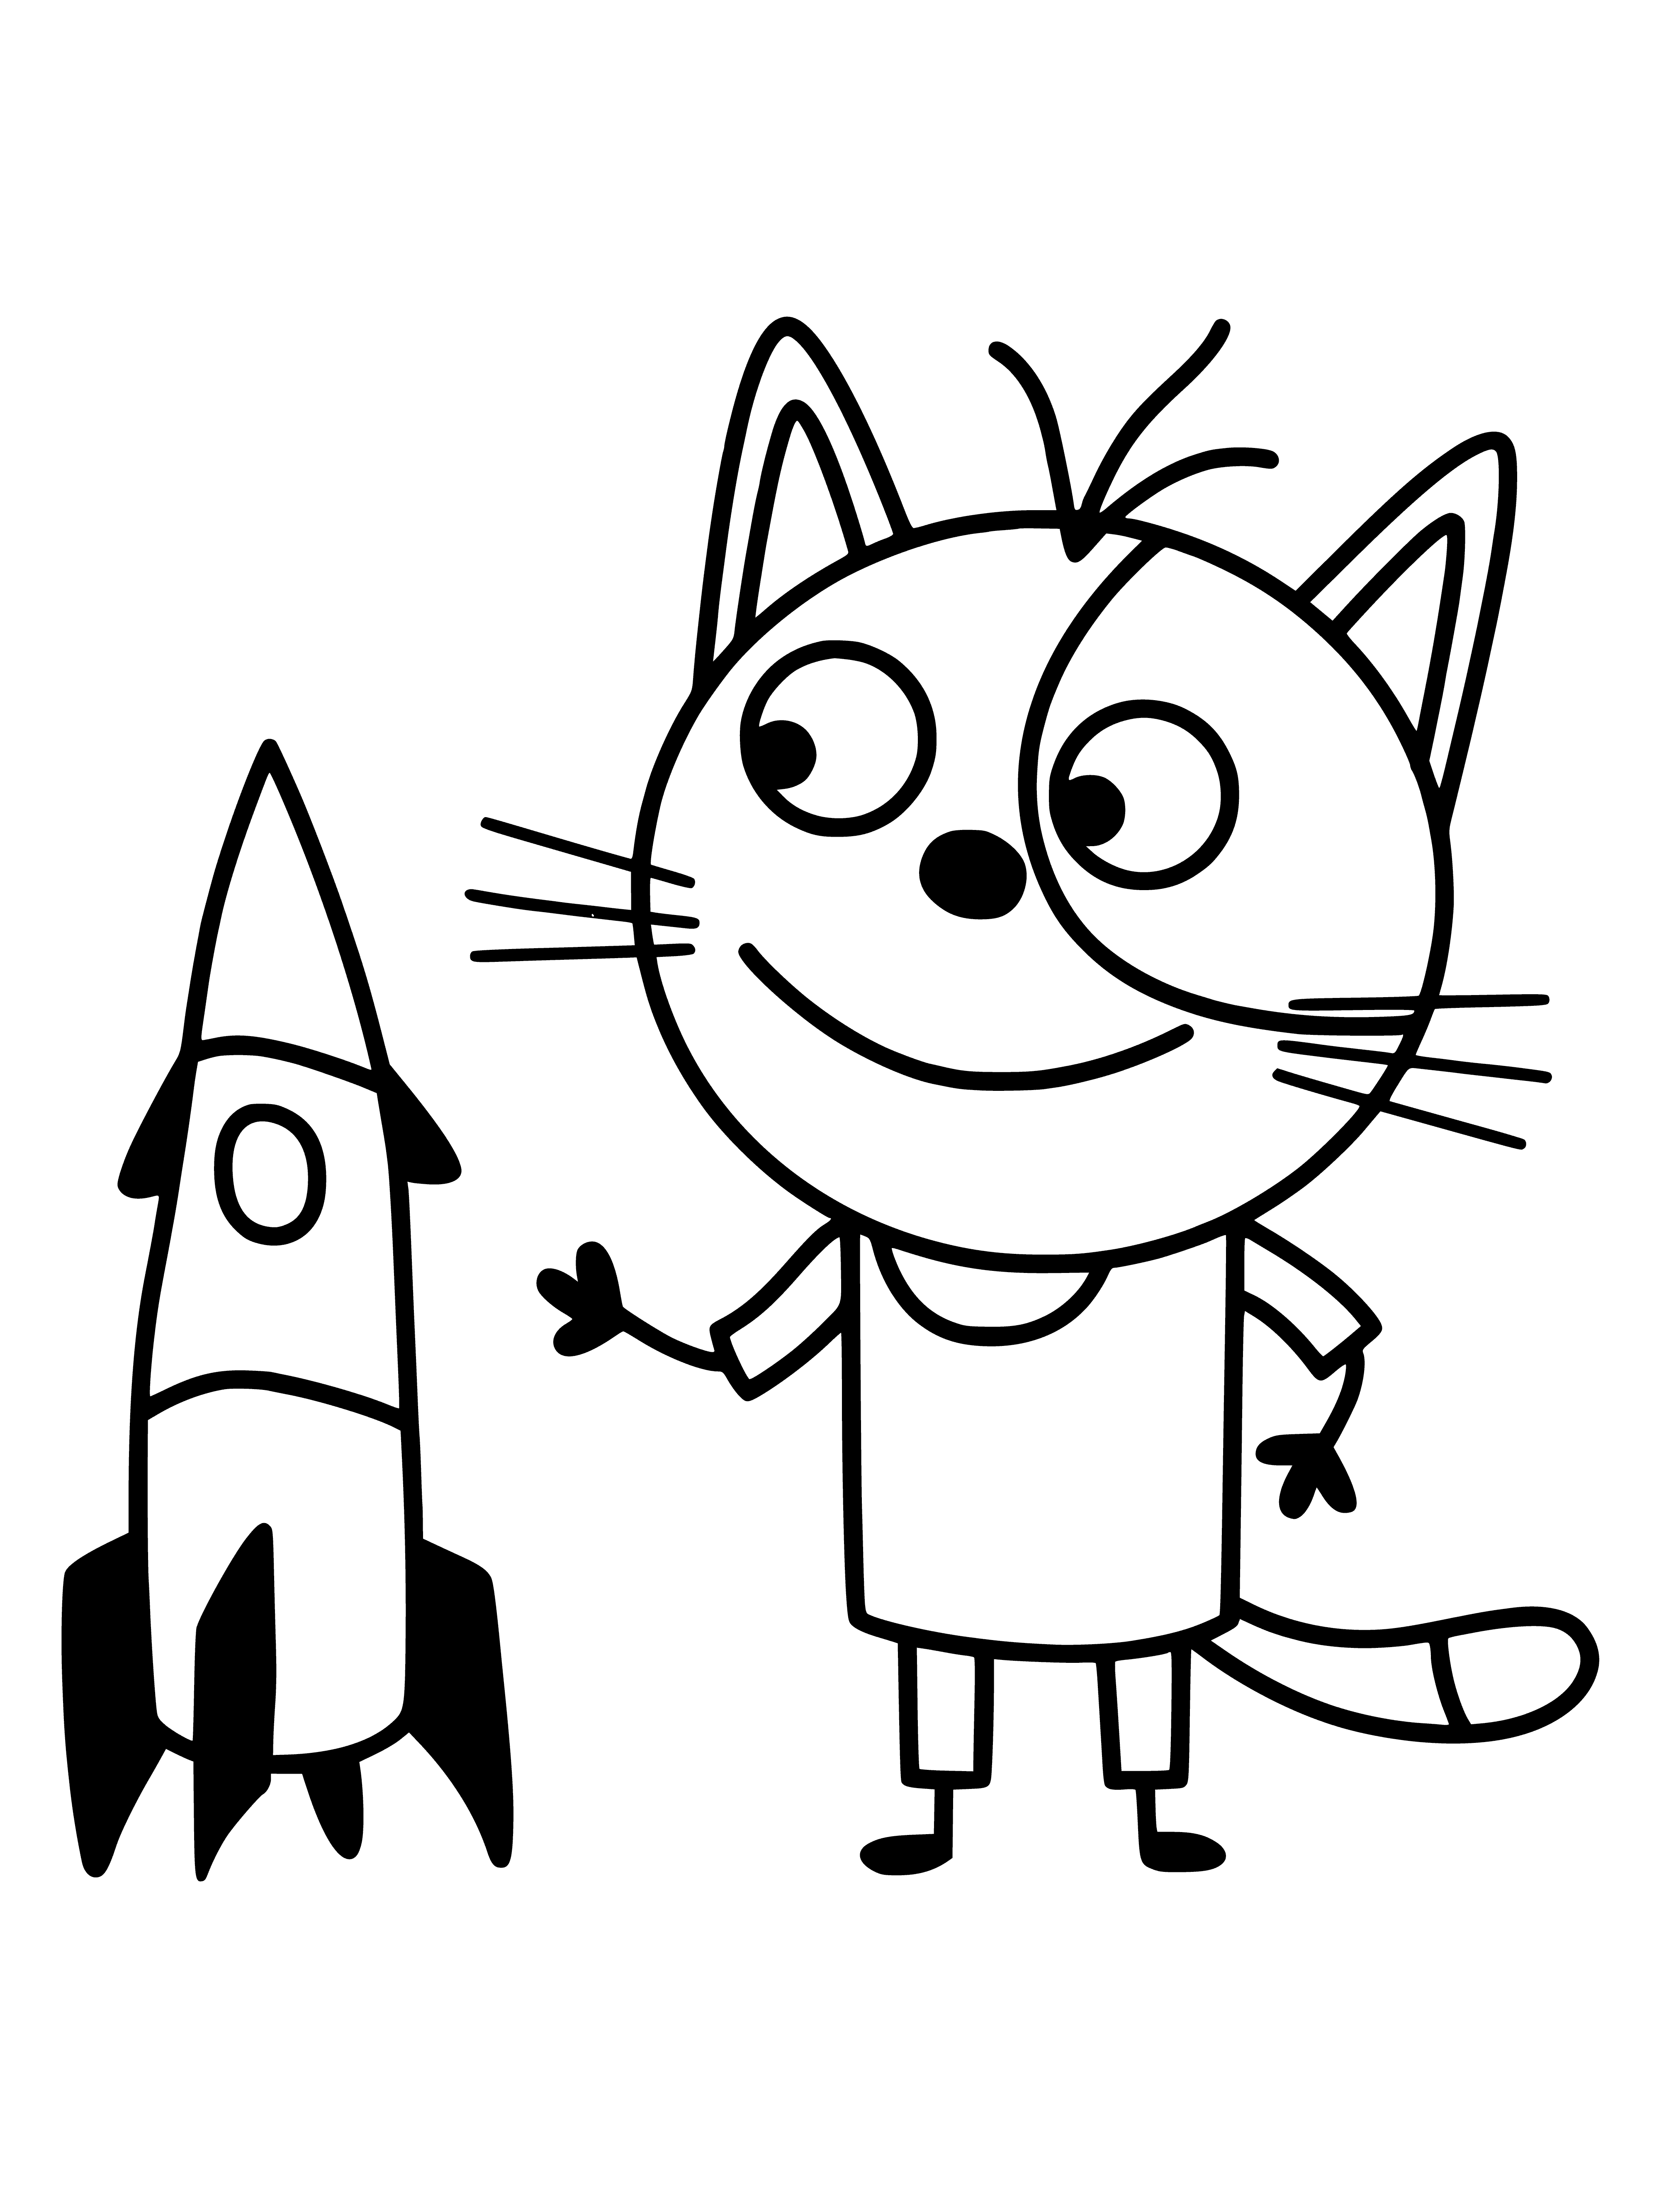 coloring page: Cats chasing a rocket launch: one airborne and two running on ground!